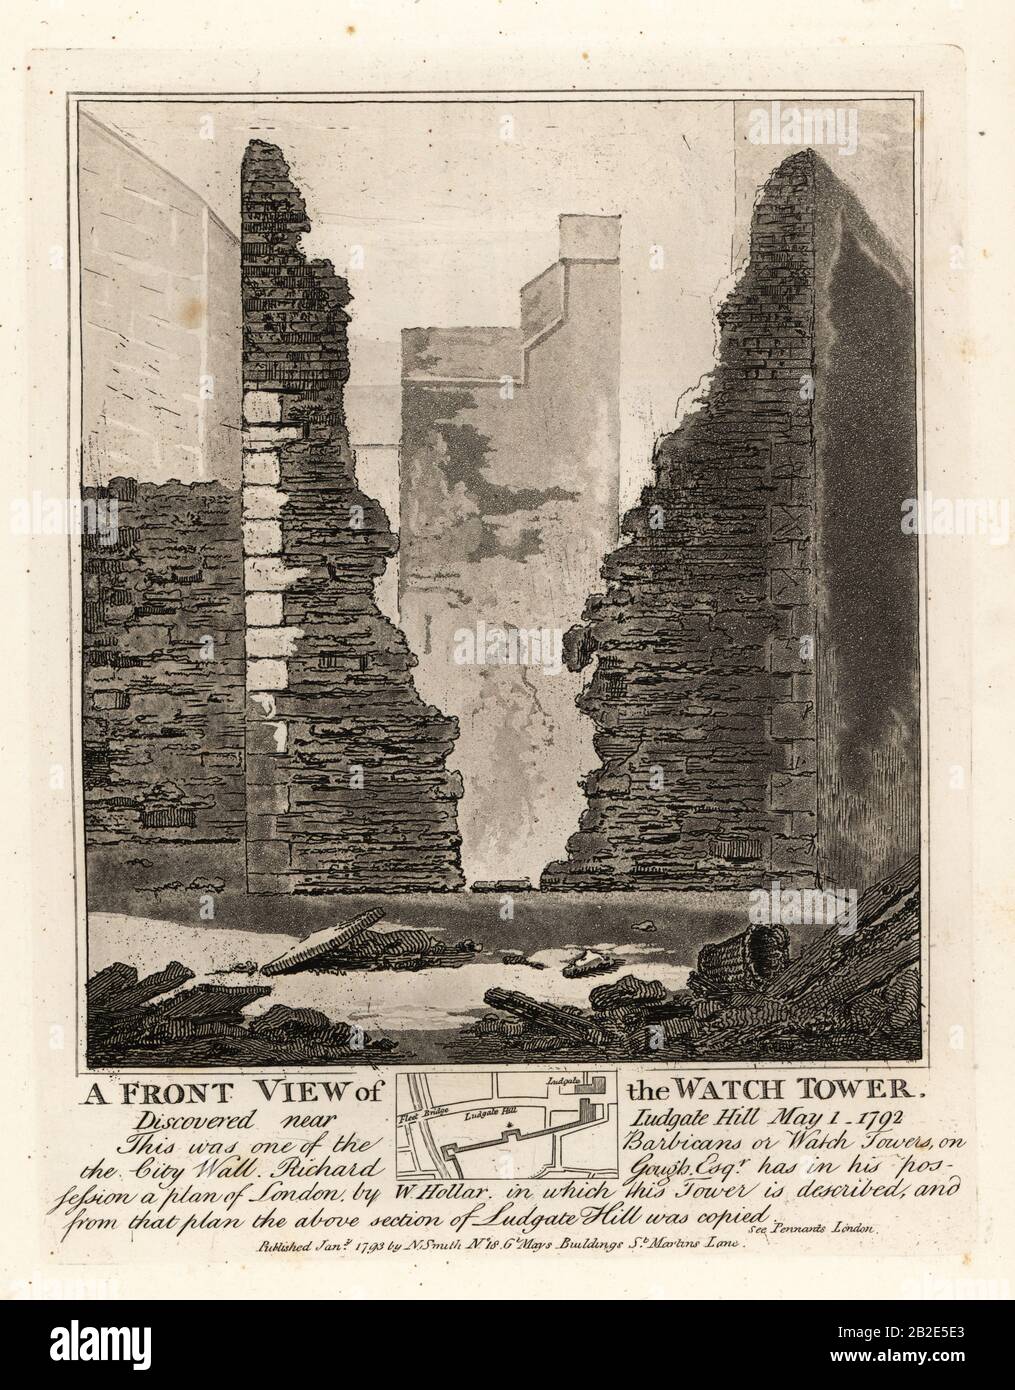 Front view of the Watch Tower or Barbican in the City Wall discovered near Ludgate Hill, May 1 1792. Copperplate engraving by John Thomas Smith after original drawings by members of the Society of Antiquaries from his J.T. Smith’s Antiquities of London and its Environs, J. Sewell, R. Folder, J. Simco, London, 1793. Stock Photo